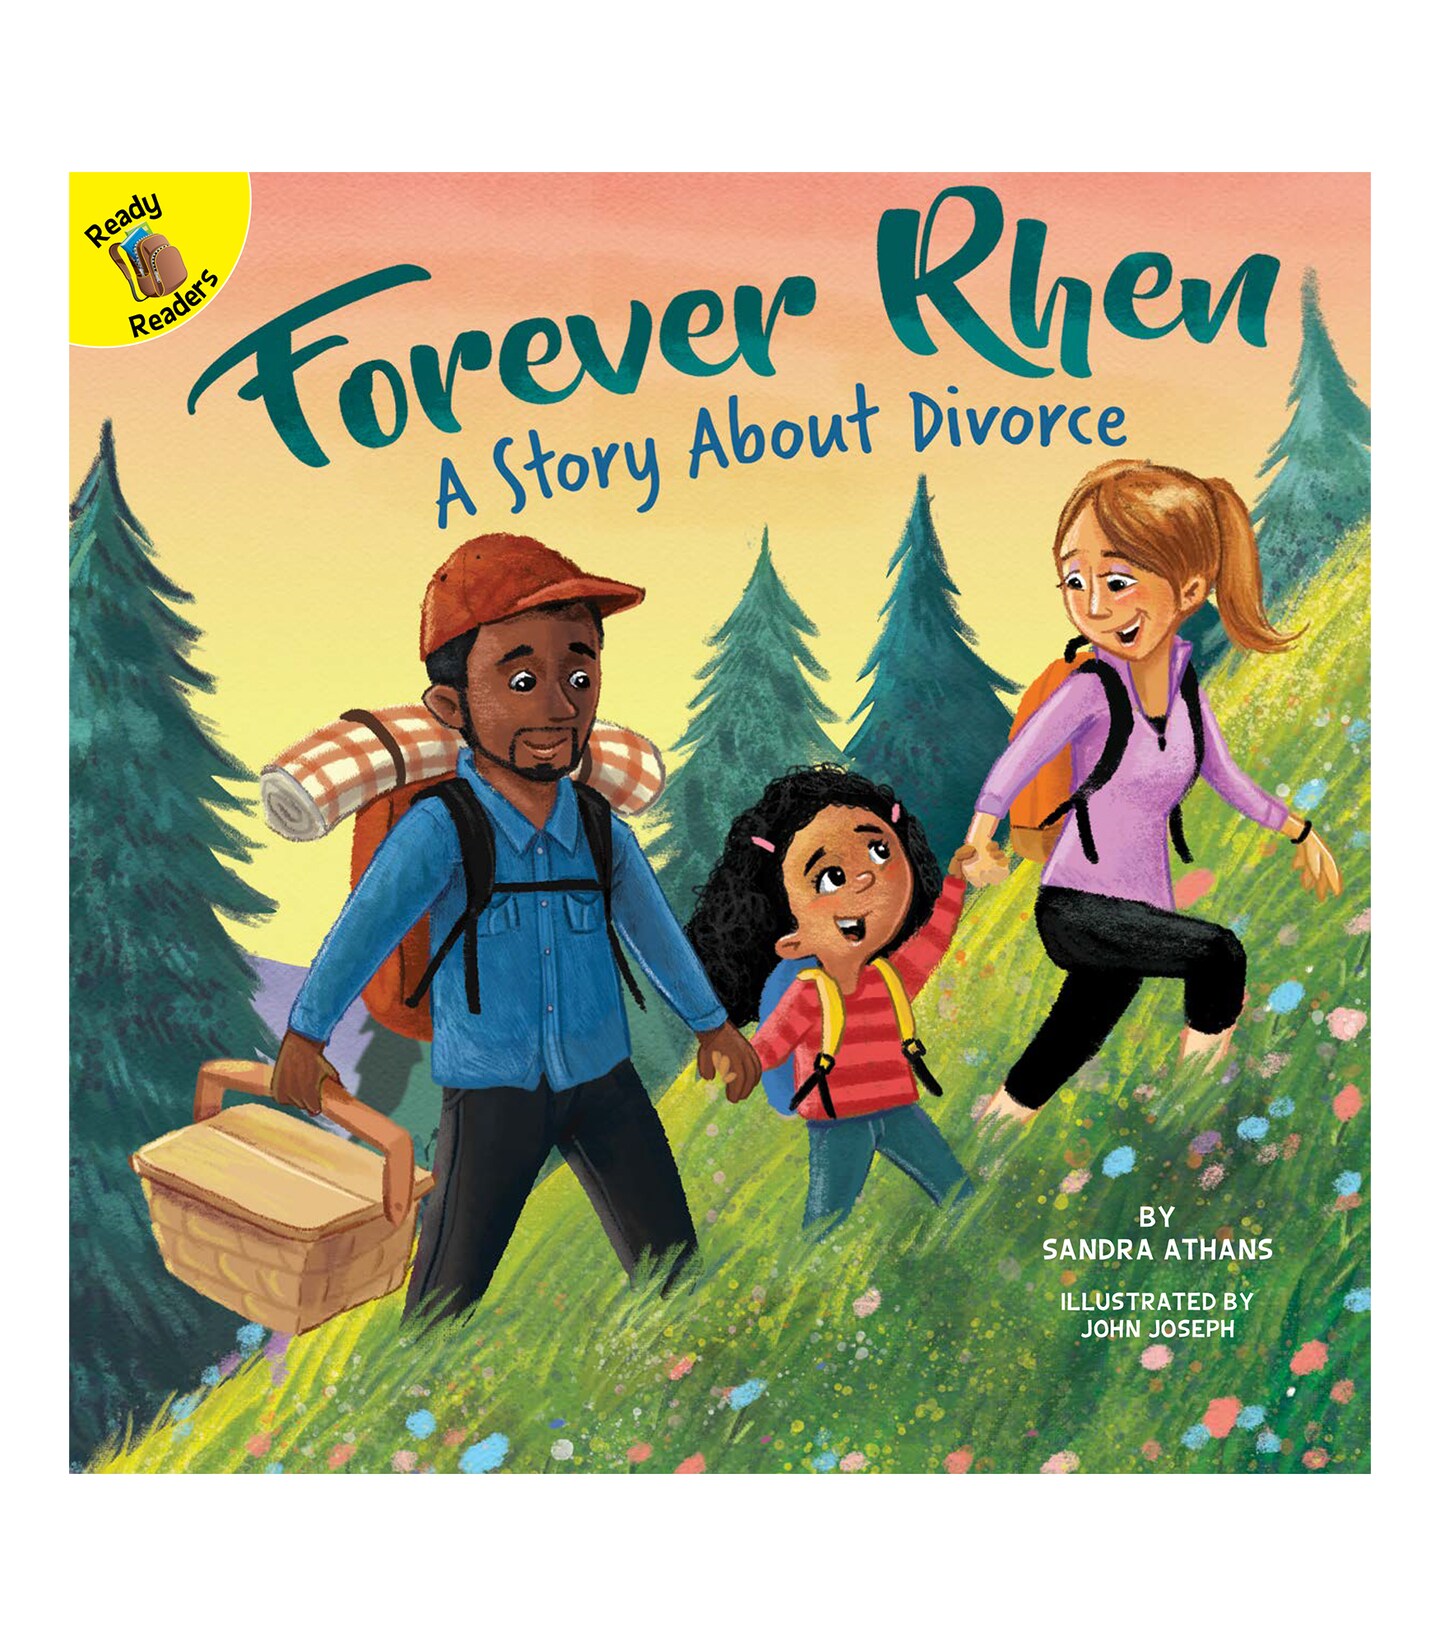 Rourke Educational Media Forever Rhen: A Story About Divorce&#x2014;Children&#x27;s Book About Dealing With Family Changes and Separation, Kindergarten-2nd Grade (24 pgs) Reader